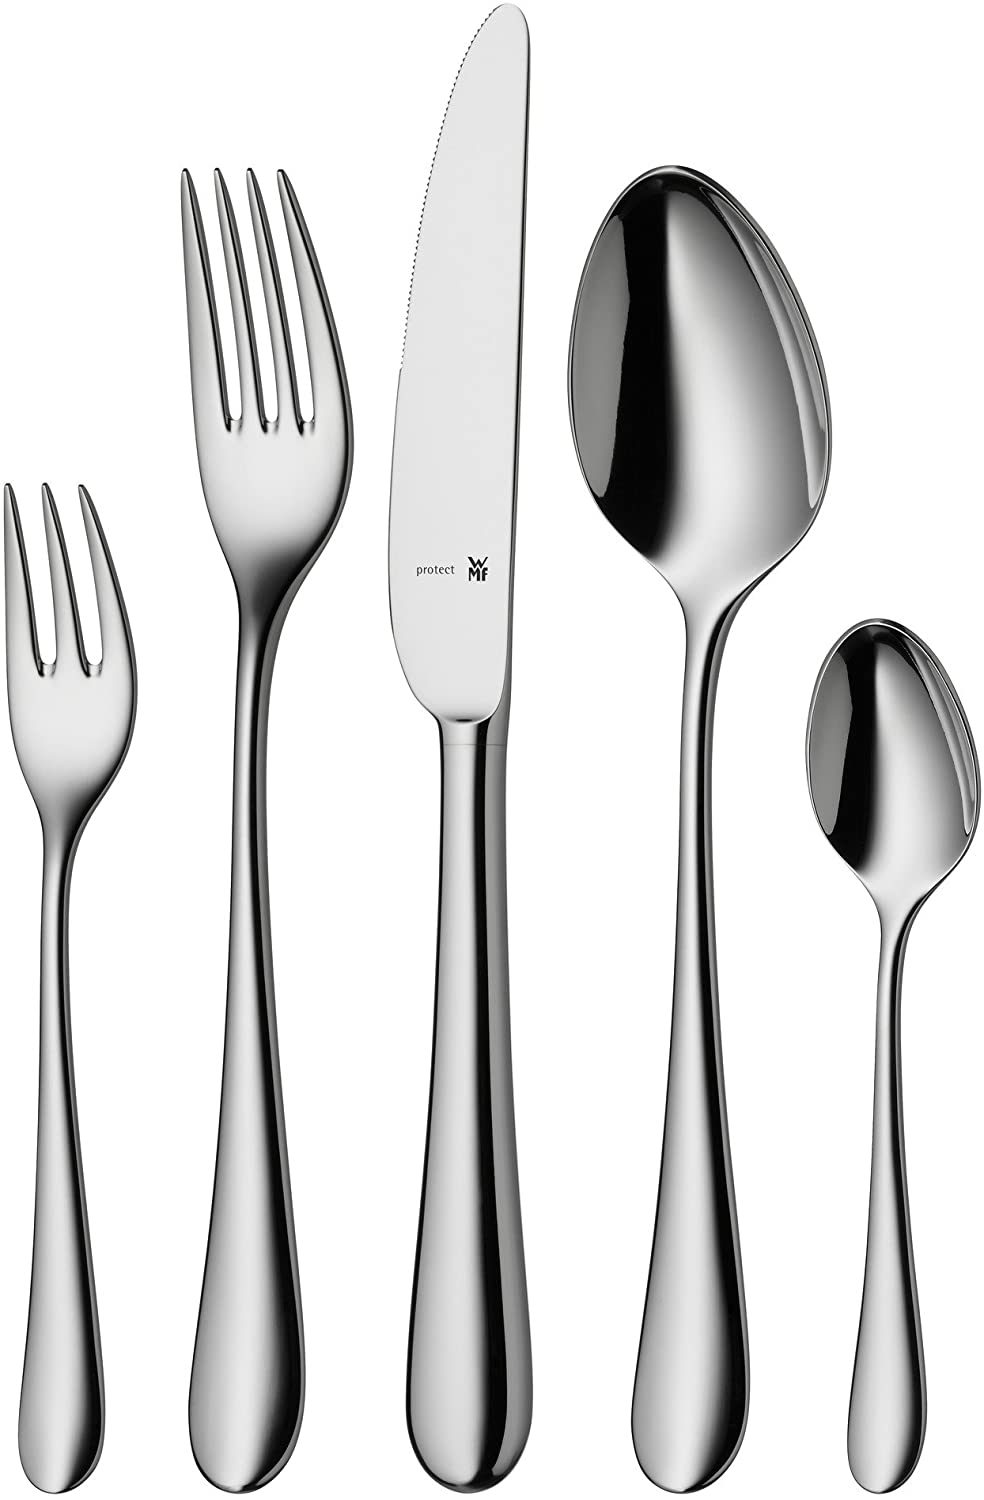 WMF Merit Cutlery Set with Knife Blade, Cromargan Protect Polished Stainless Steel